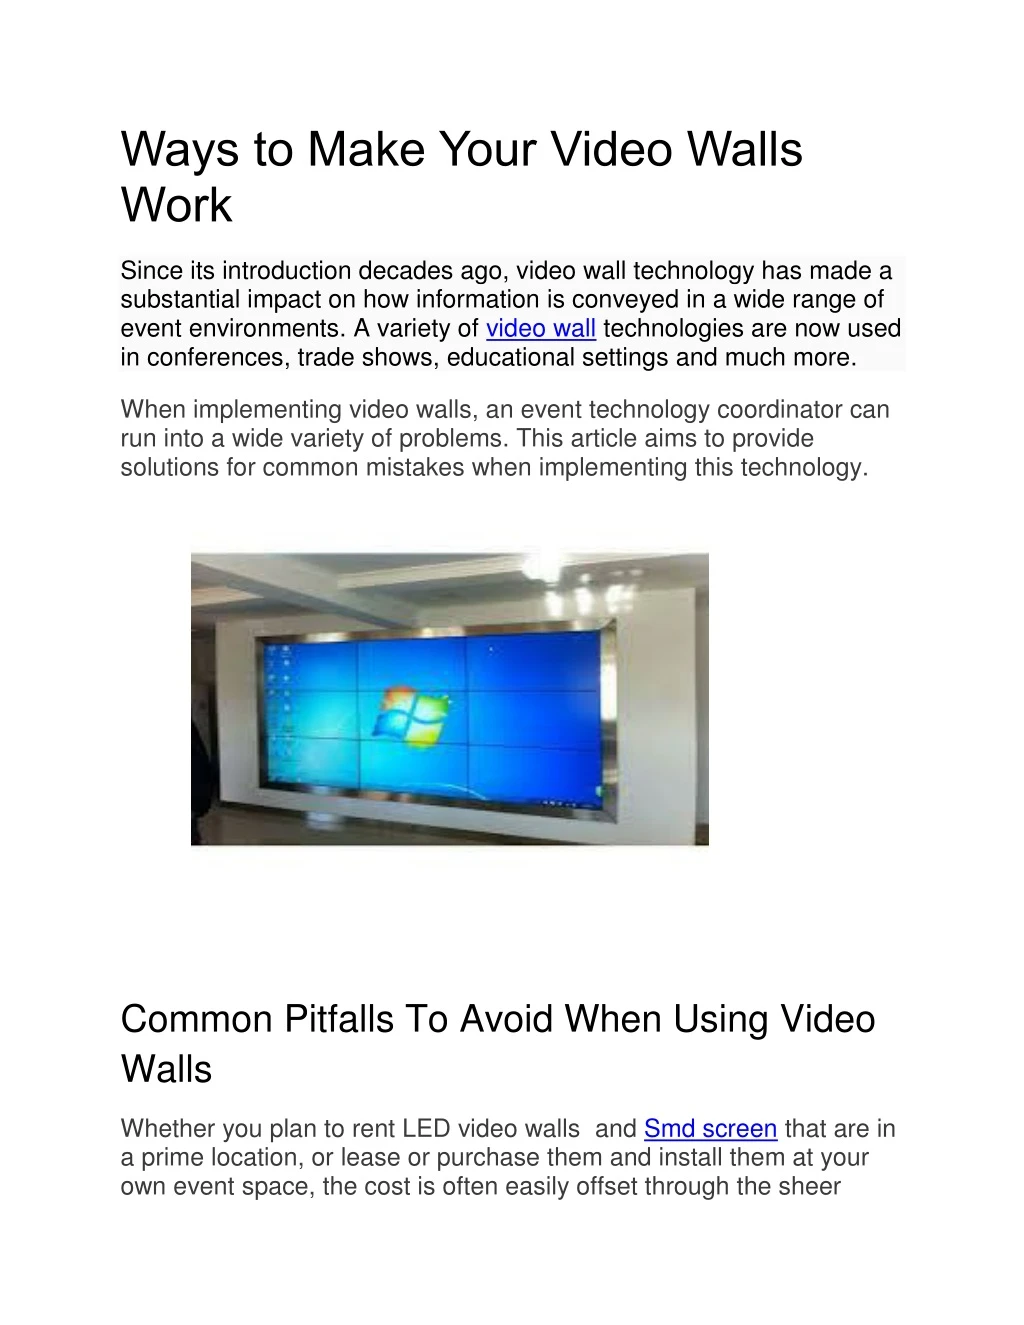 ways to make your video walls work